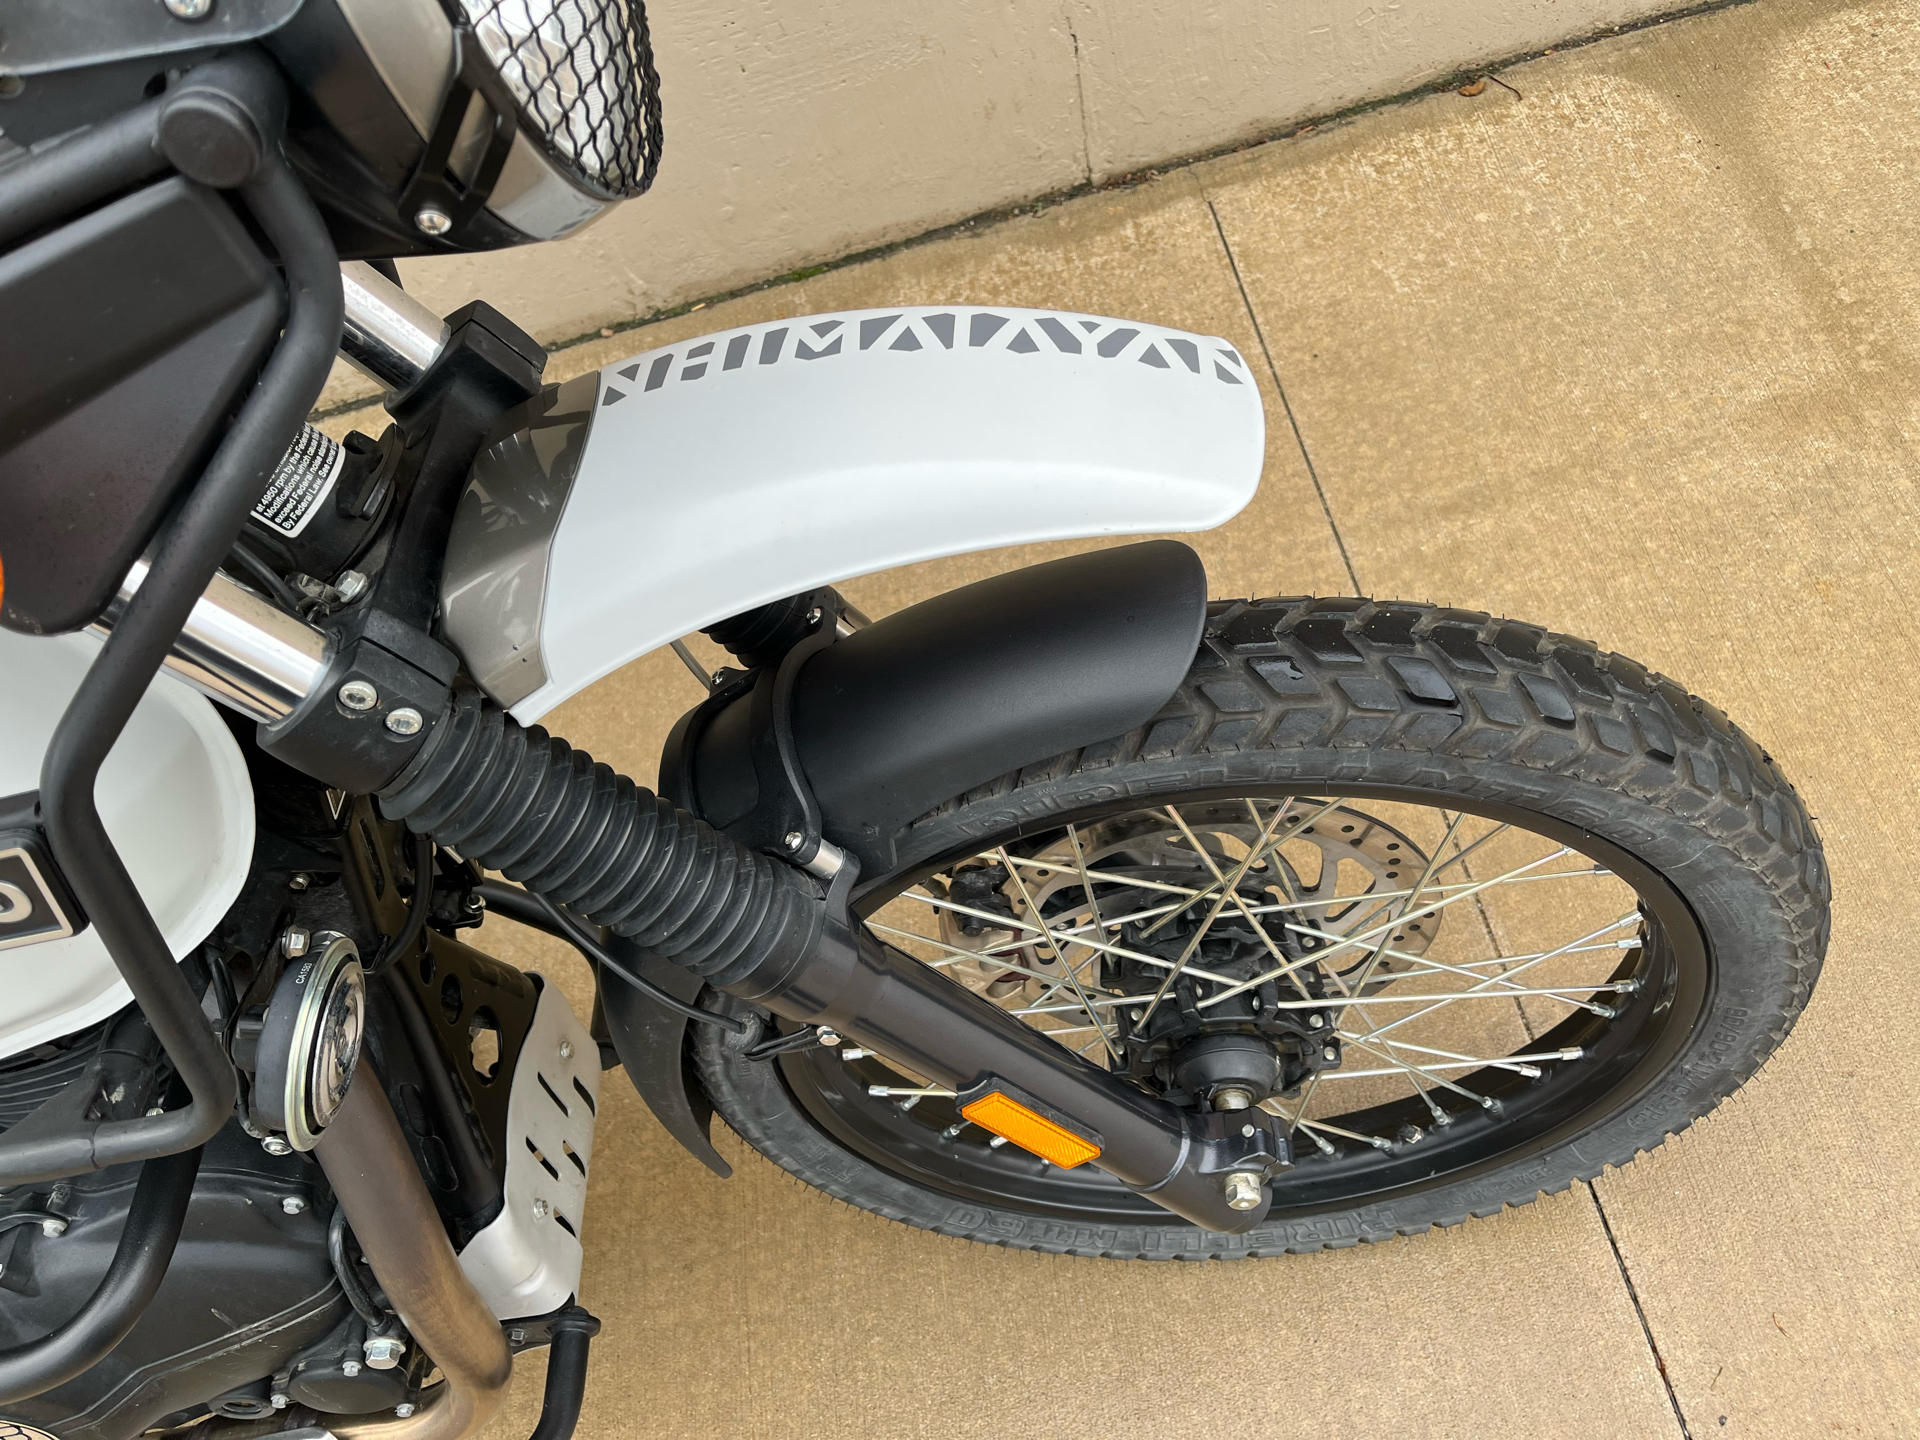 2018 Royal Enfield Himalayan 411 EFI in Roselle, Illinois - Photo 11